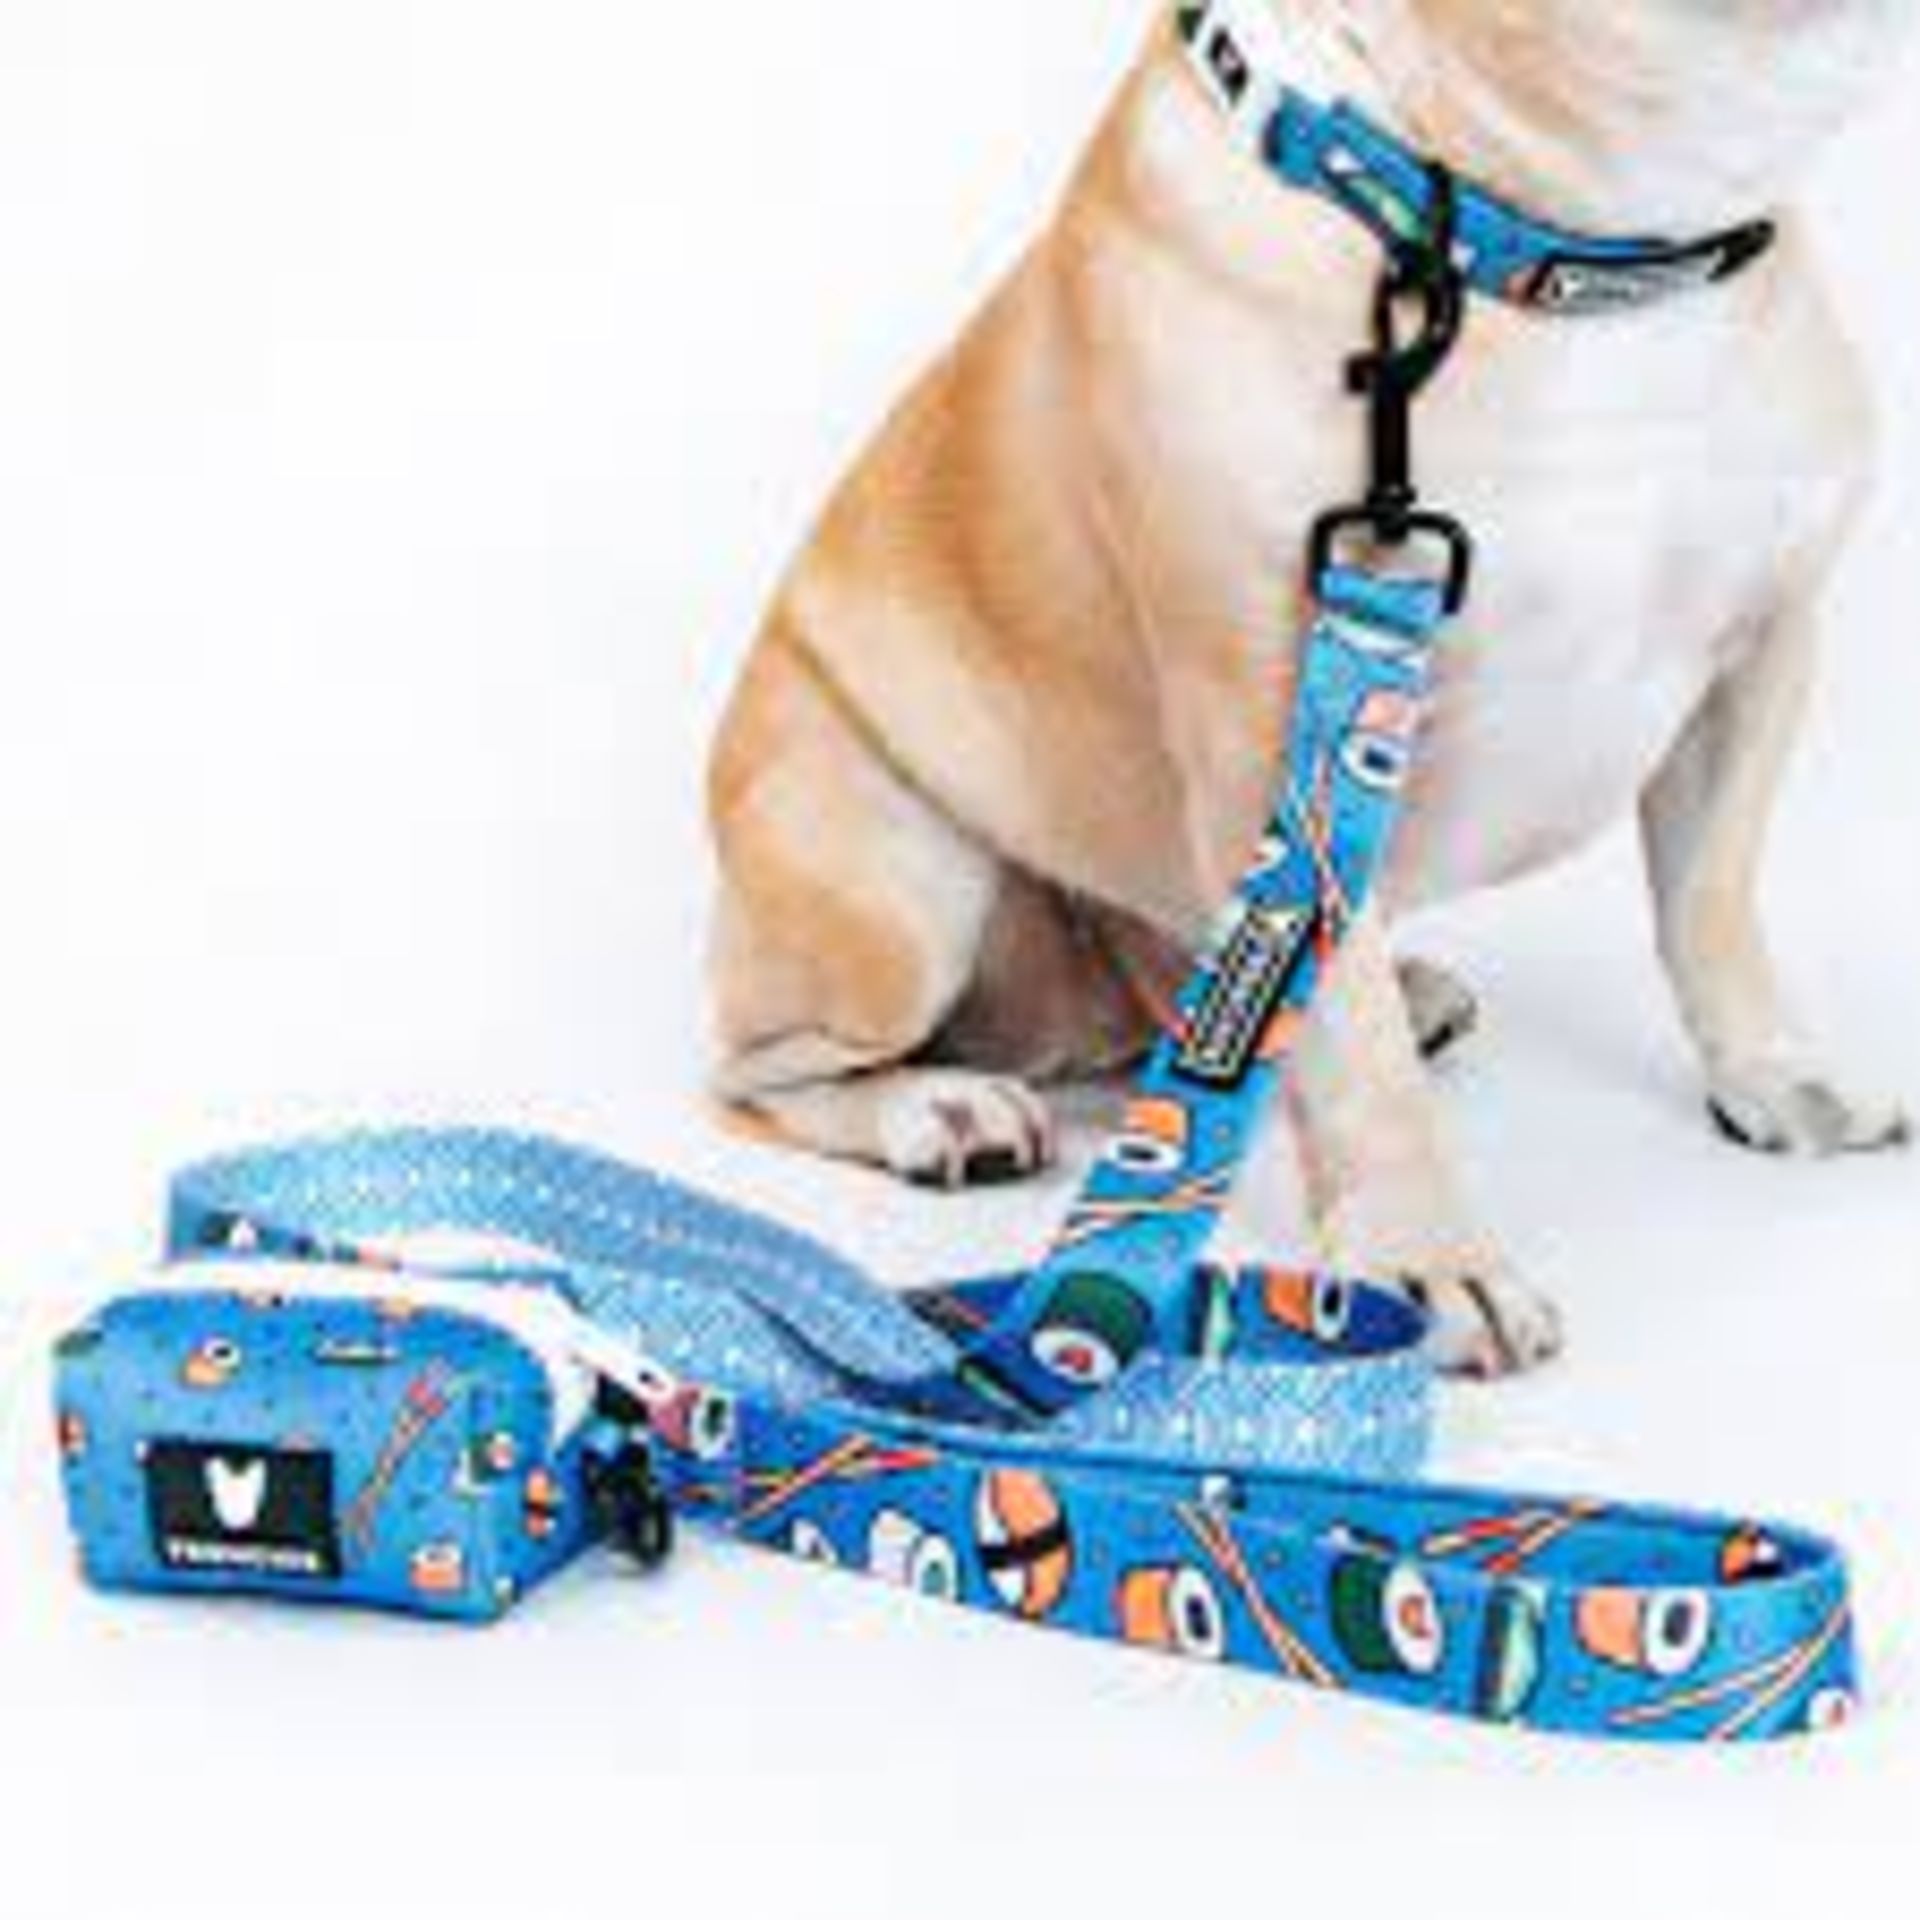 Trade Lot 100 X New .Packaged Frenchie The Bulldog Luxury Branded Dog Products. May include items